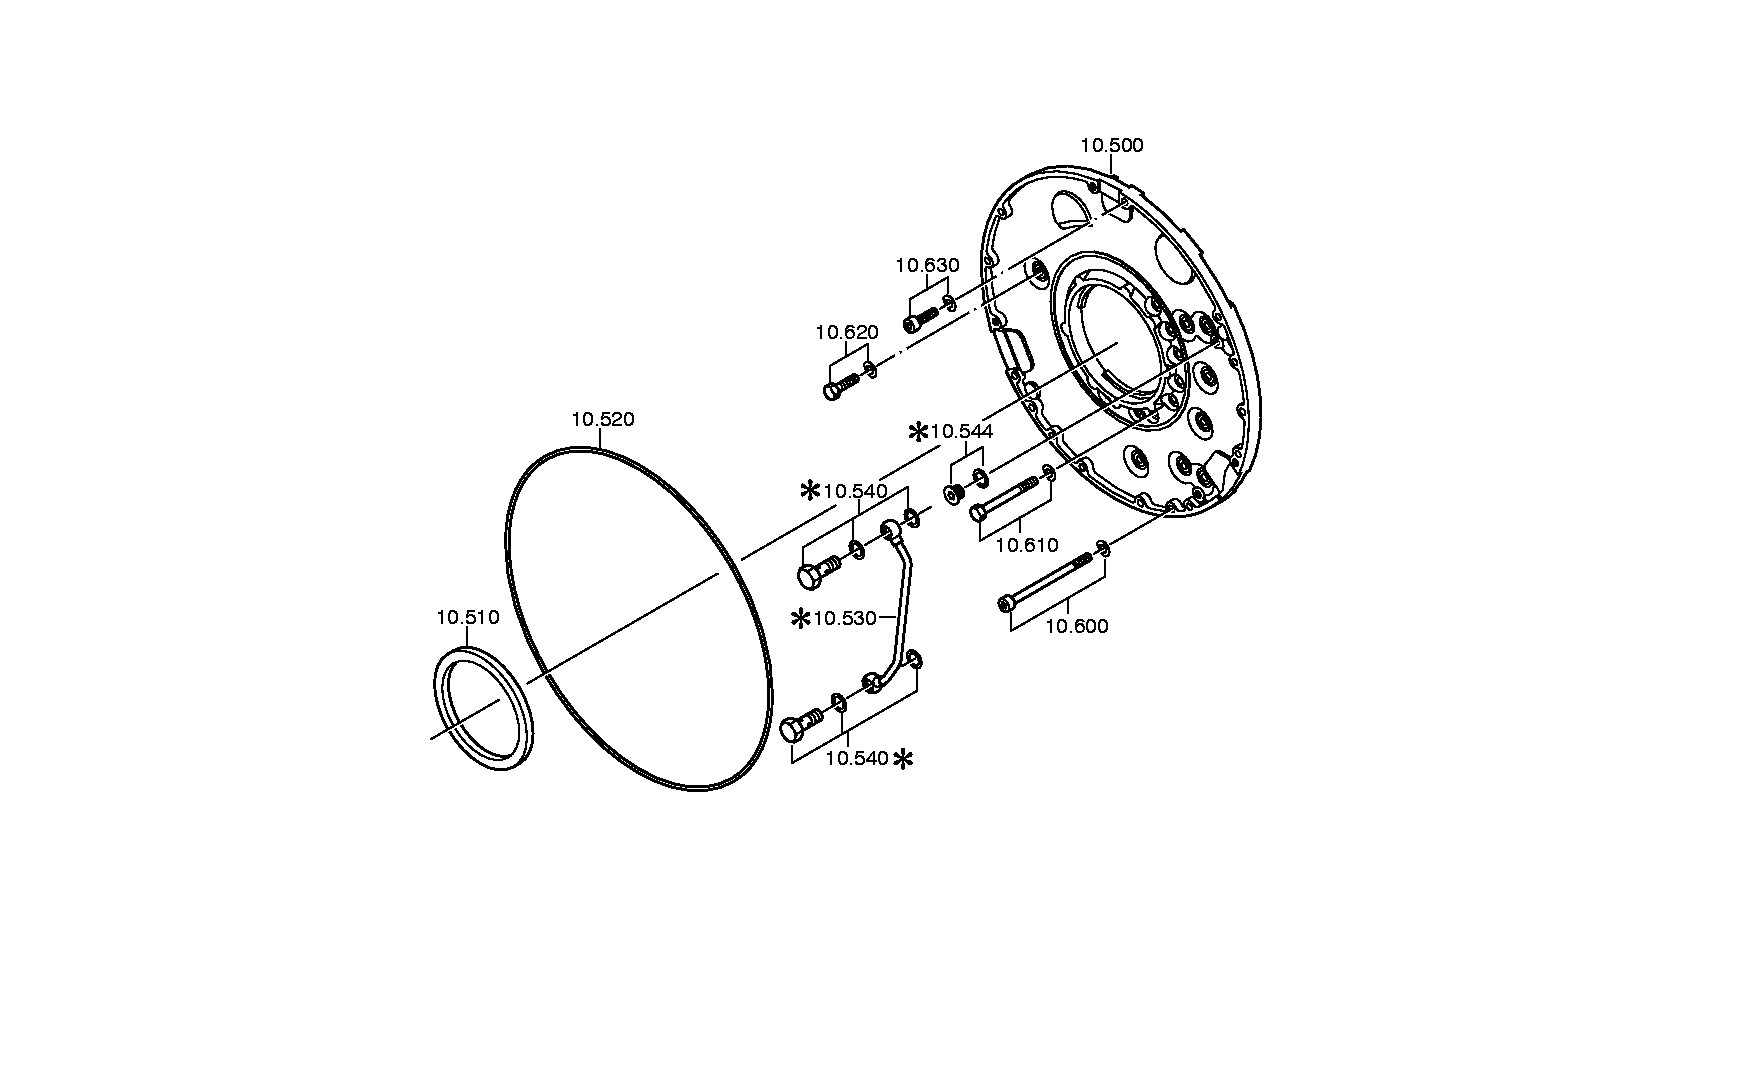 drawing for BELL-SUEDAFRIKA 7380013 - SHAFT SEAL (figure 3)